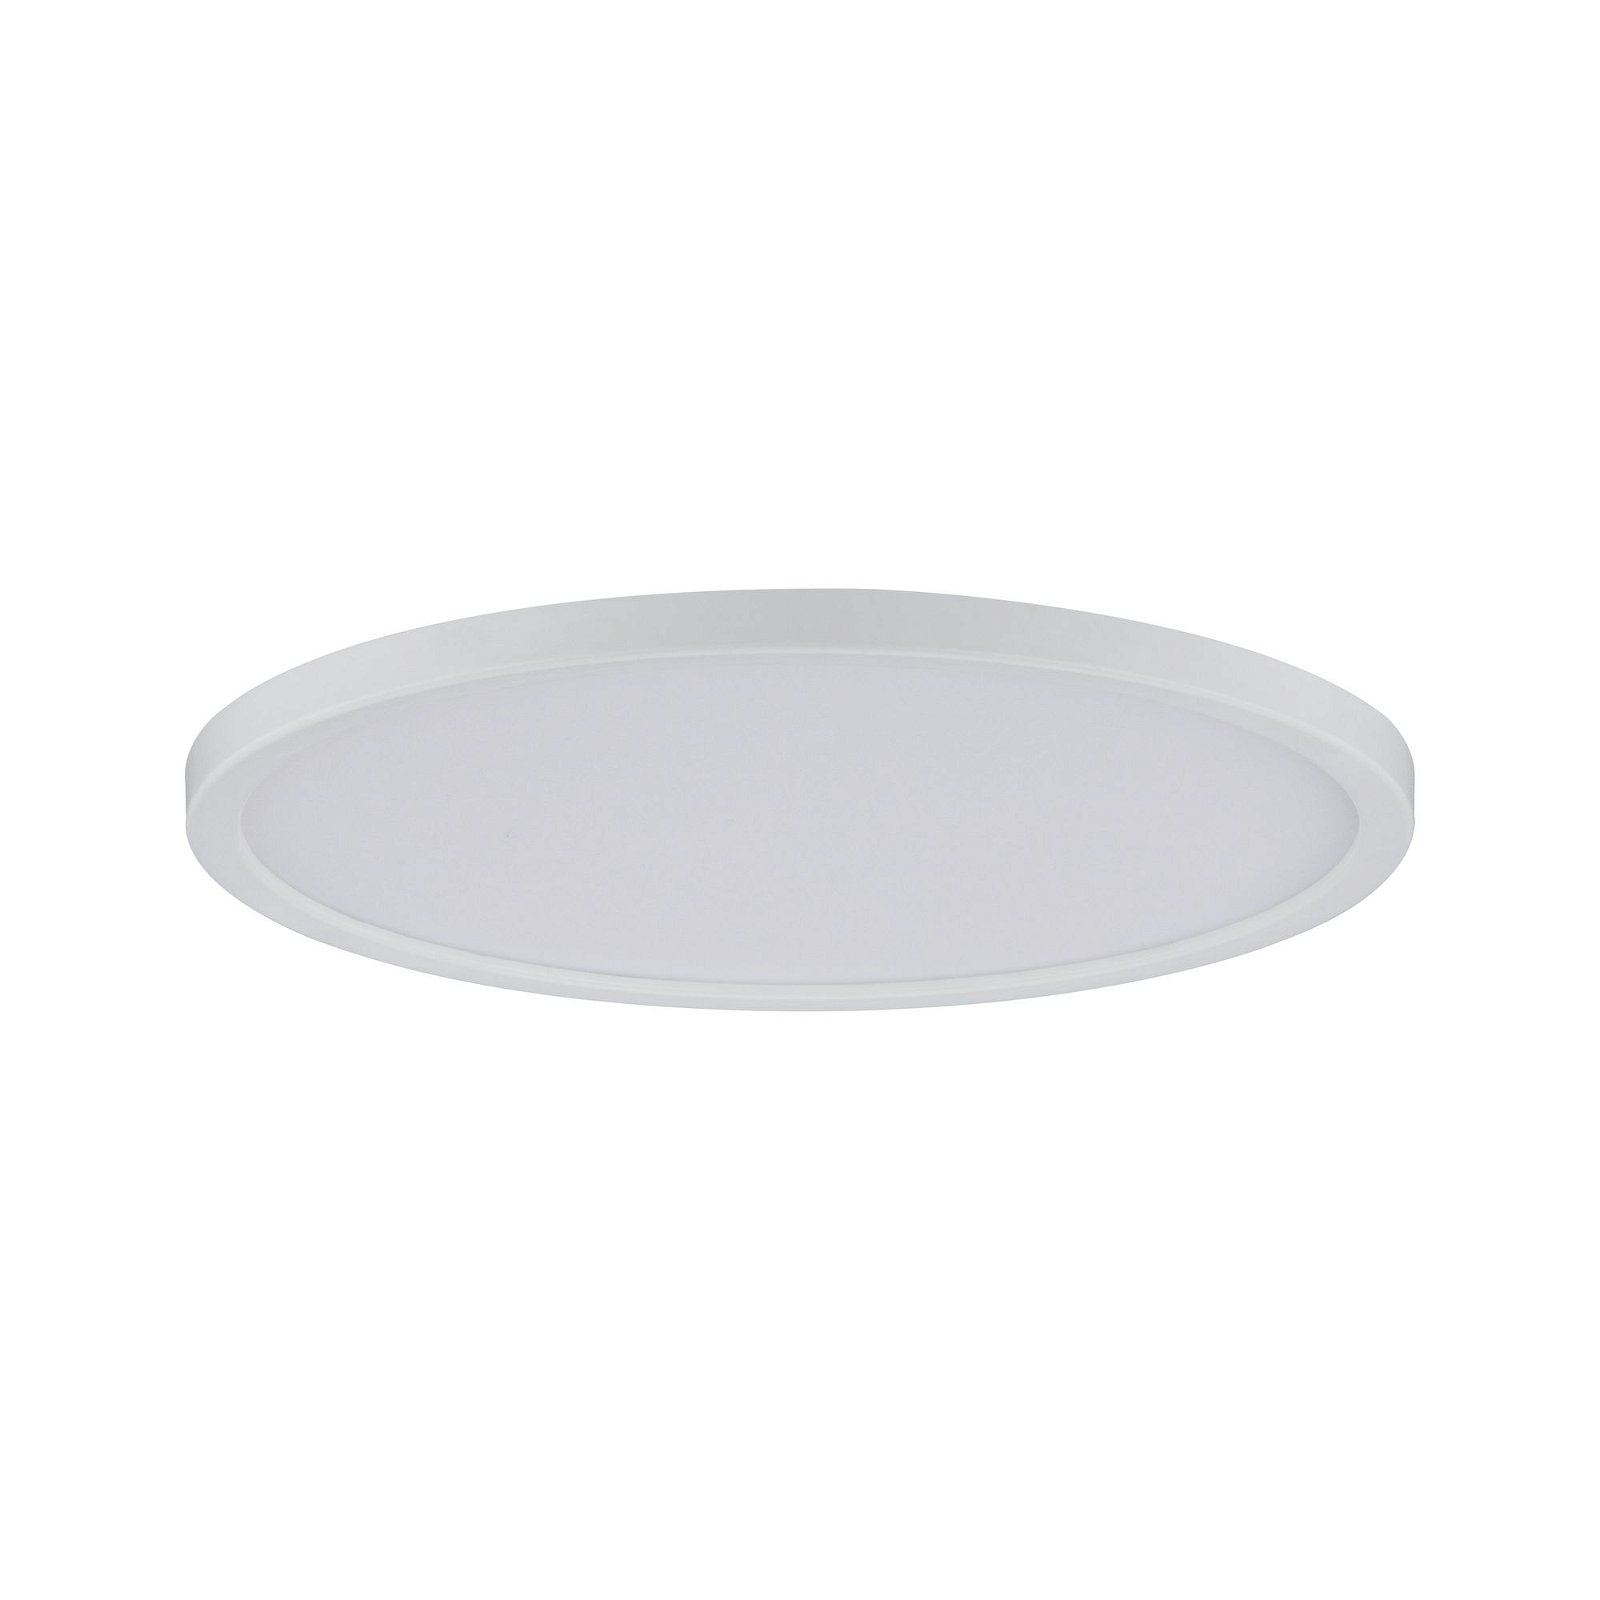 LED-inbouwpaneel Areo rond 180mm 3000K Wit mat